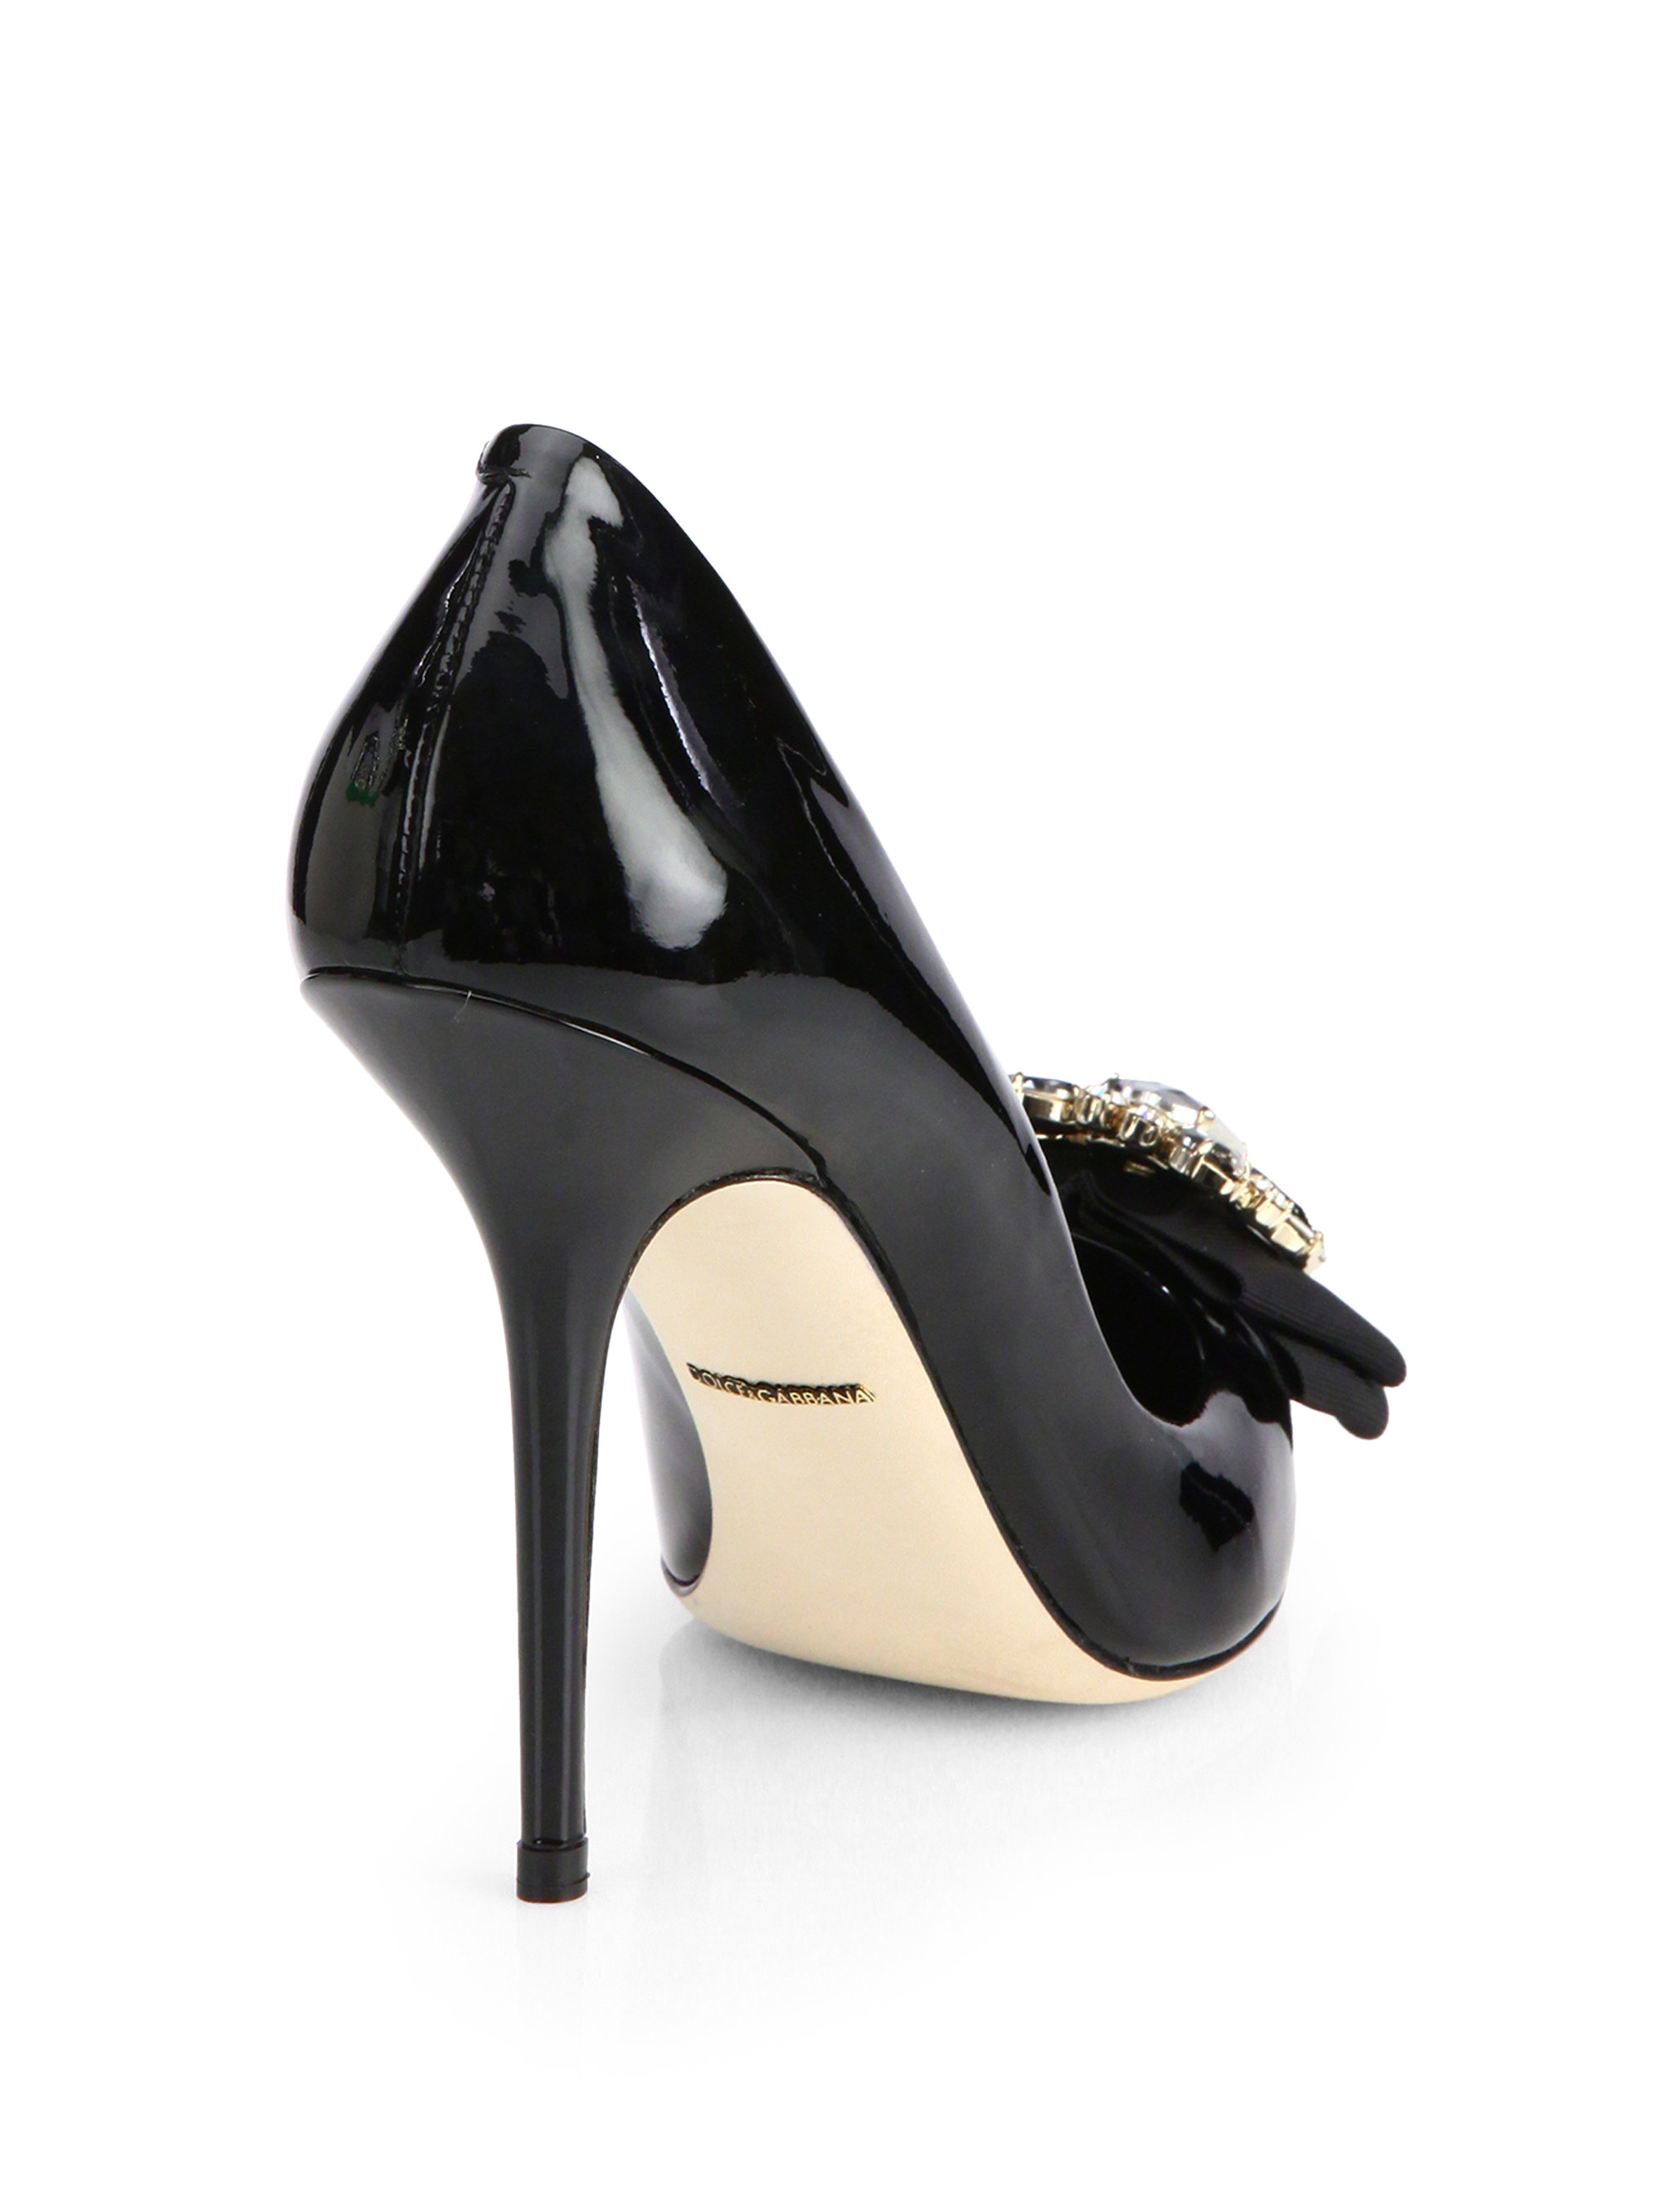 Dolce & Gabbana Jeweled Bow Patent Leather Pumps in Black - Lyst